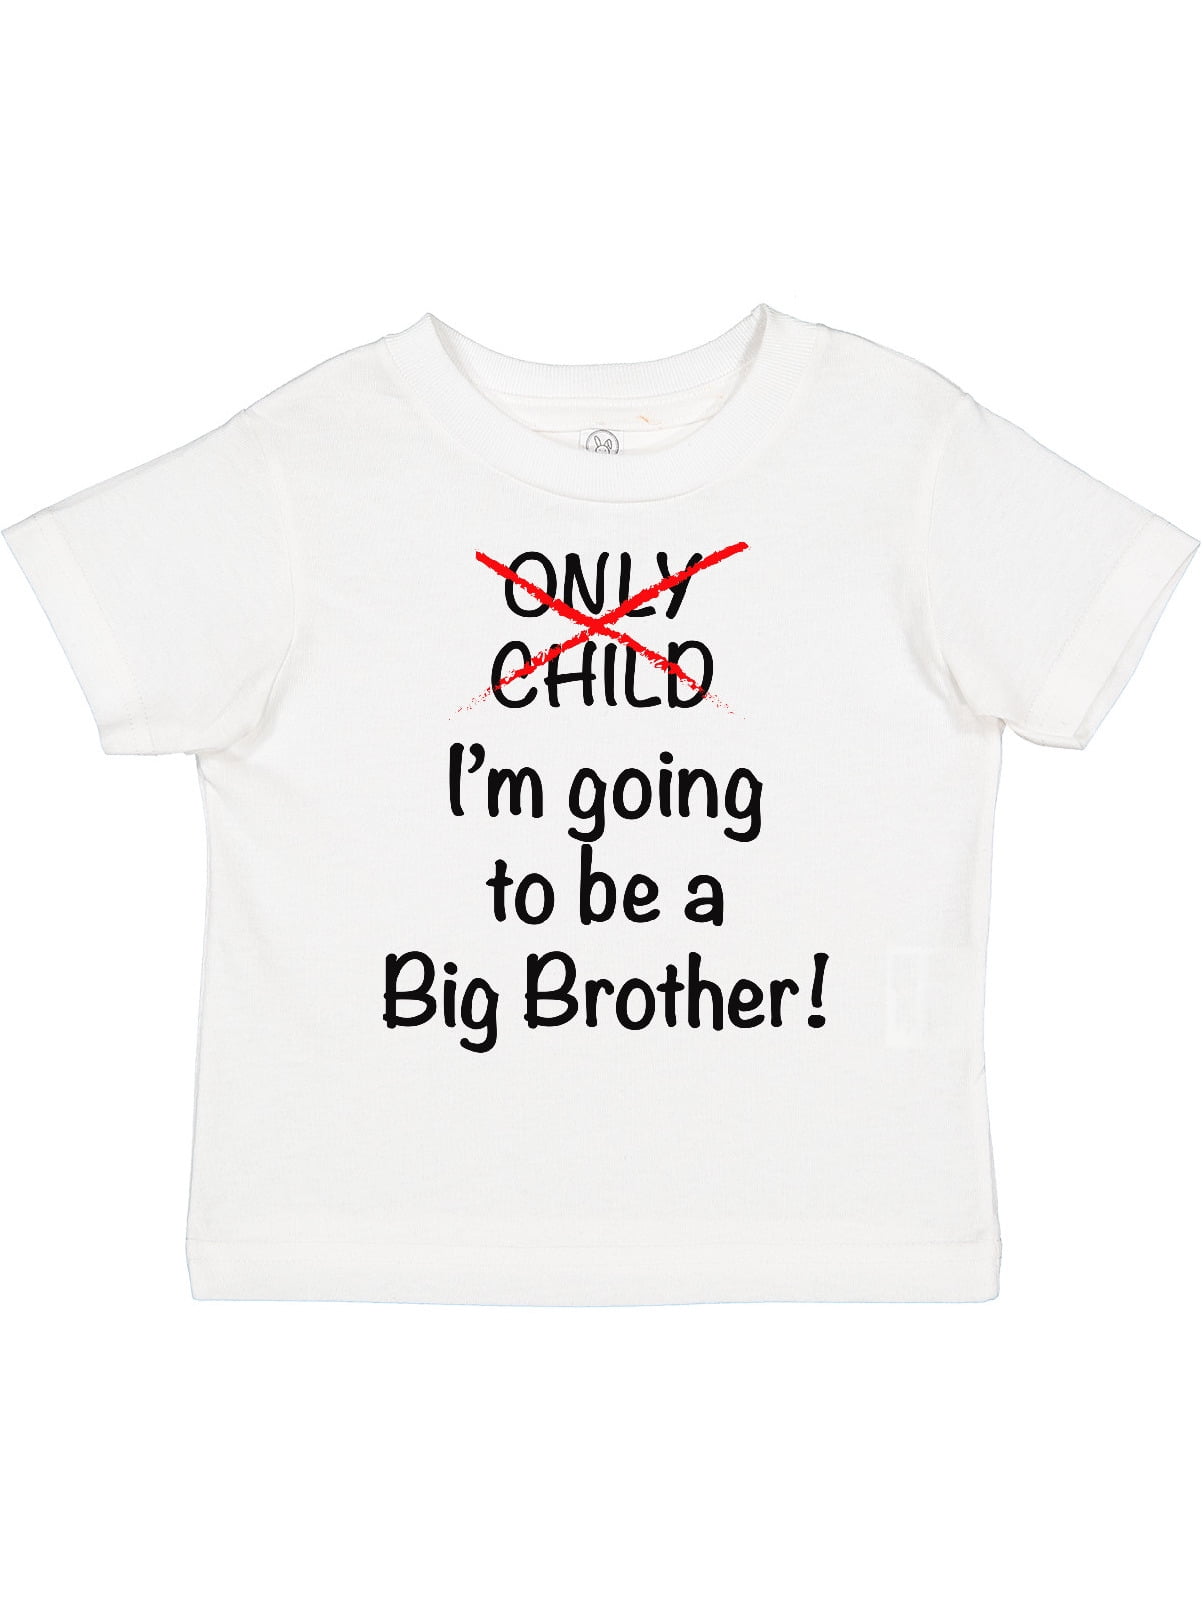 I'm going to be a Big Brother Birthday Present Children's  T-shirt kids 